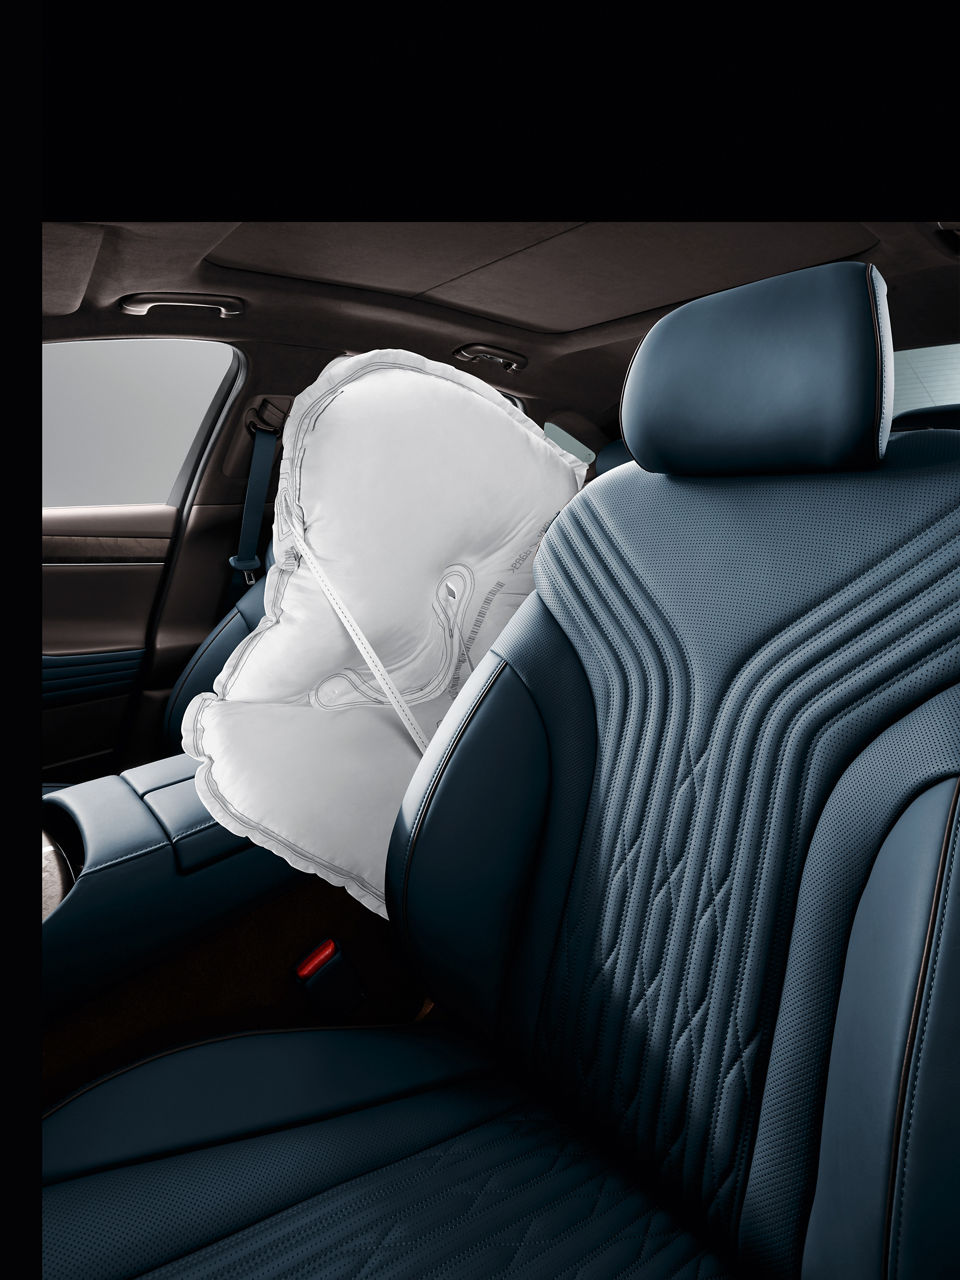 Blue driver's seat of a car with activated side airbag